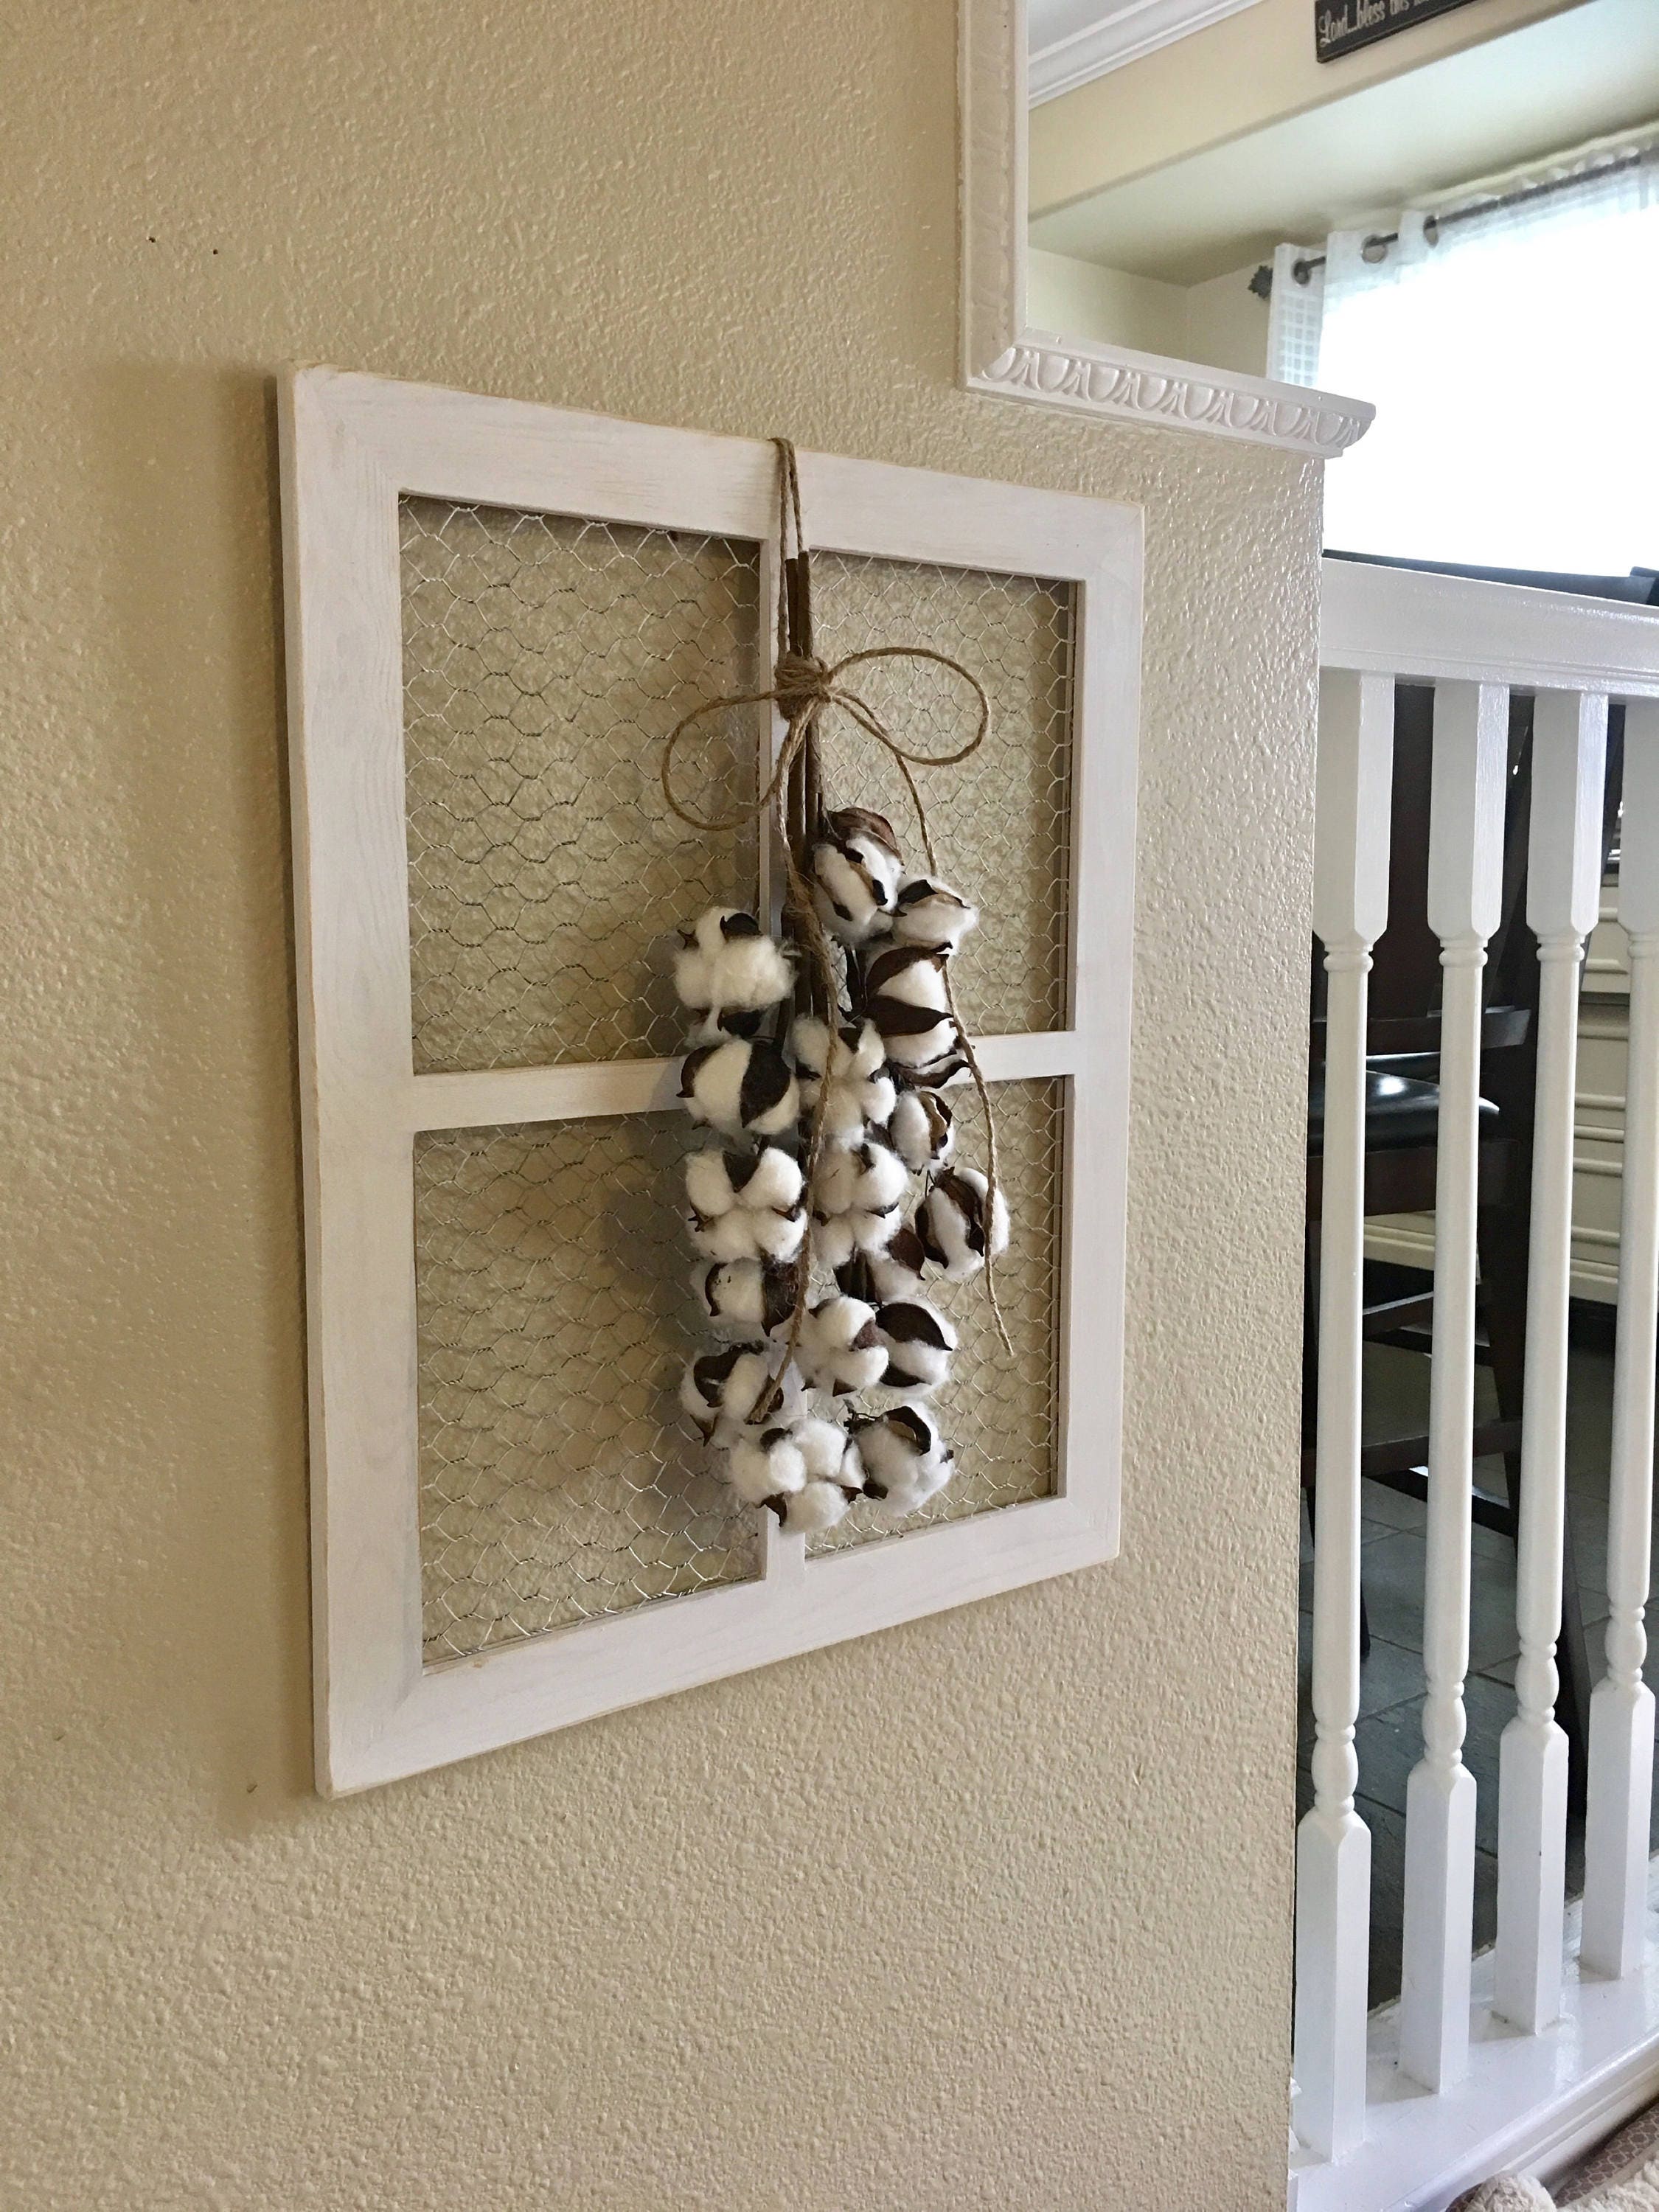 Chicken Wire Frame With Wreath/rustic Wall Decor/farmhouse Decor/home  Sign/farmhouse Wall Decor/home Decor/wall Hanging/wreath/mini Wreath 